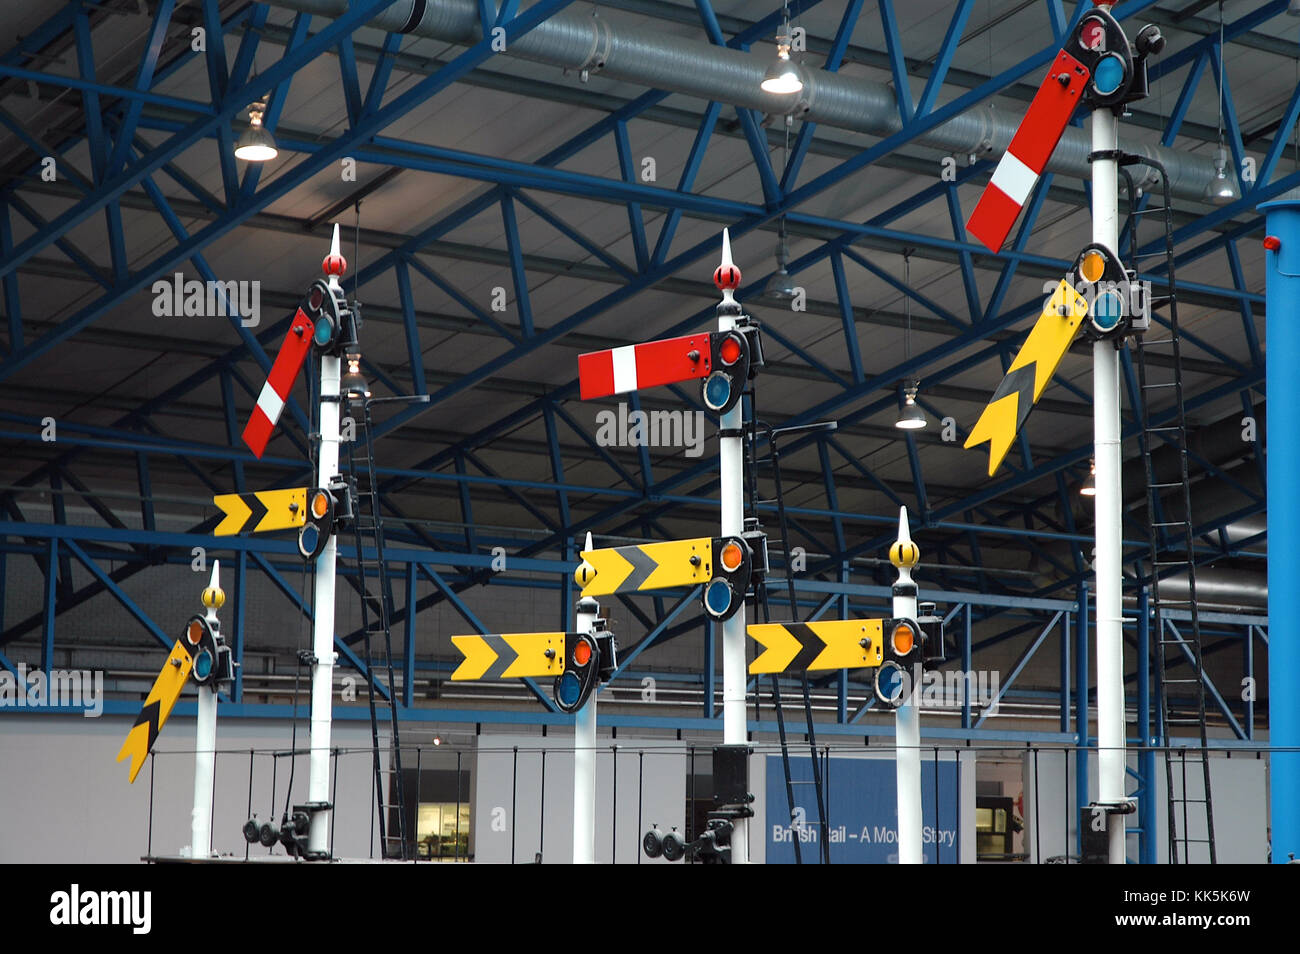 Semaphore Signals on display at The National Railway Museum, York, England Stock Photo